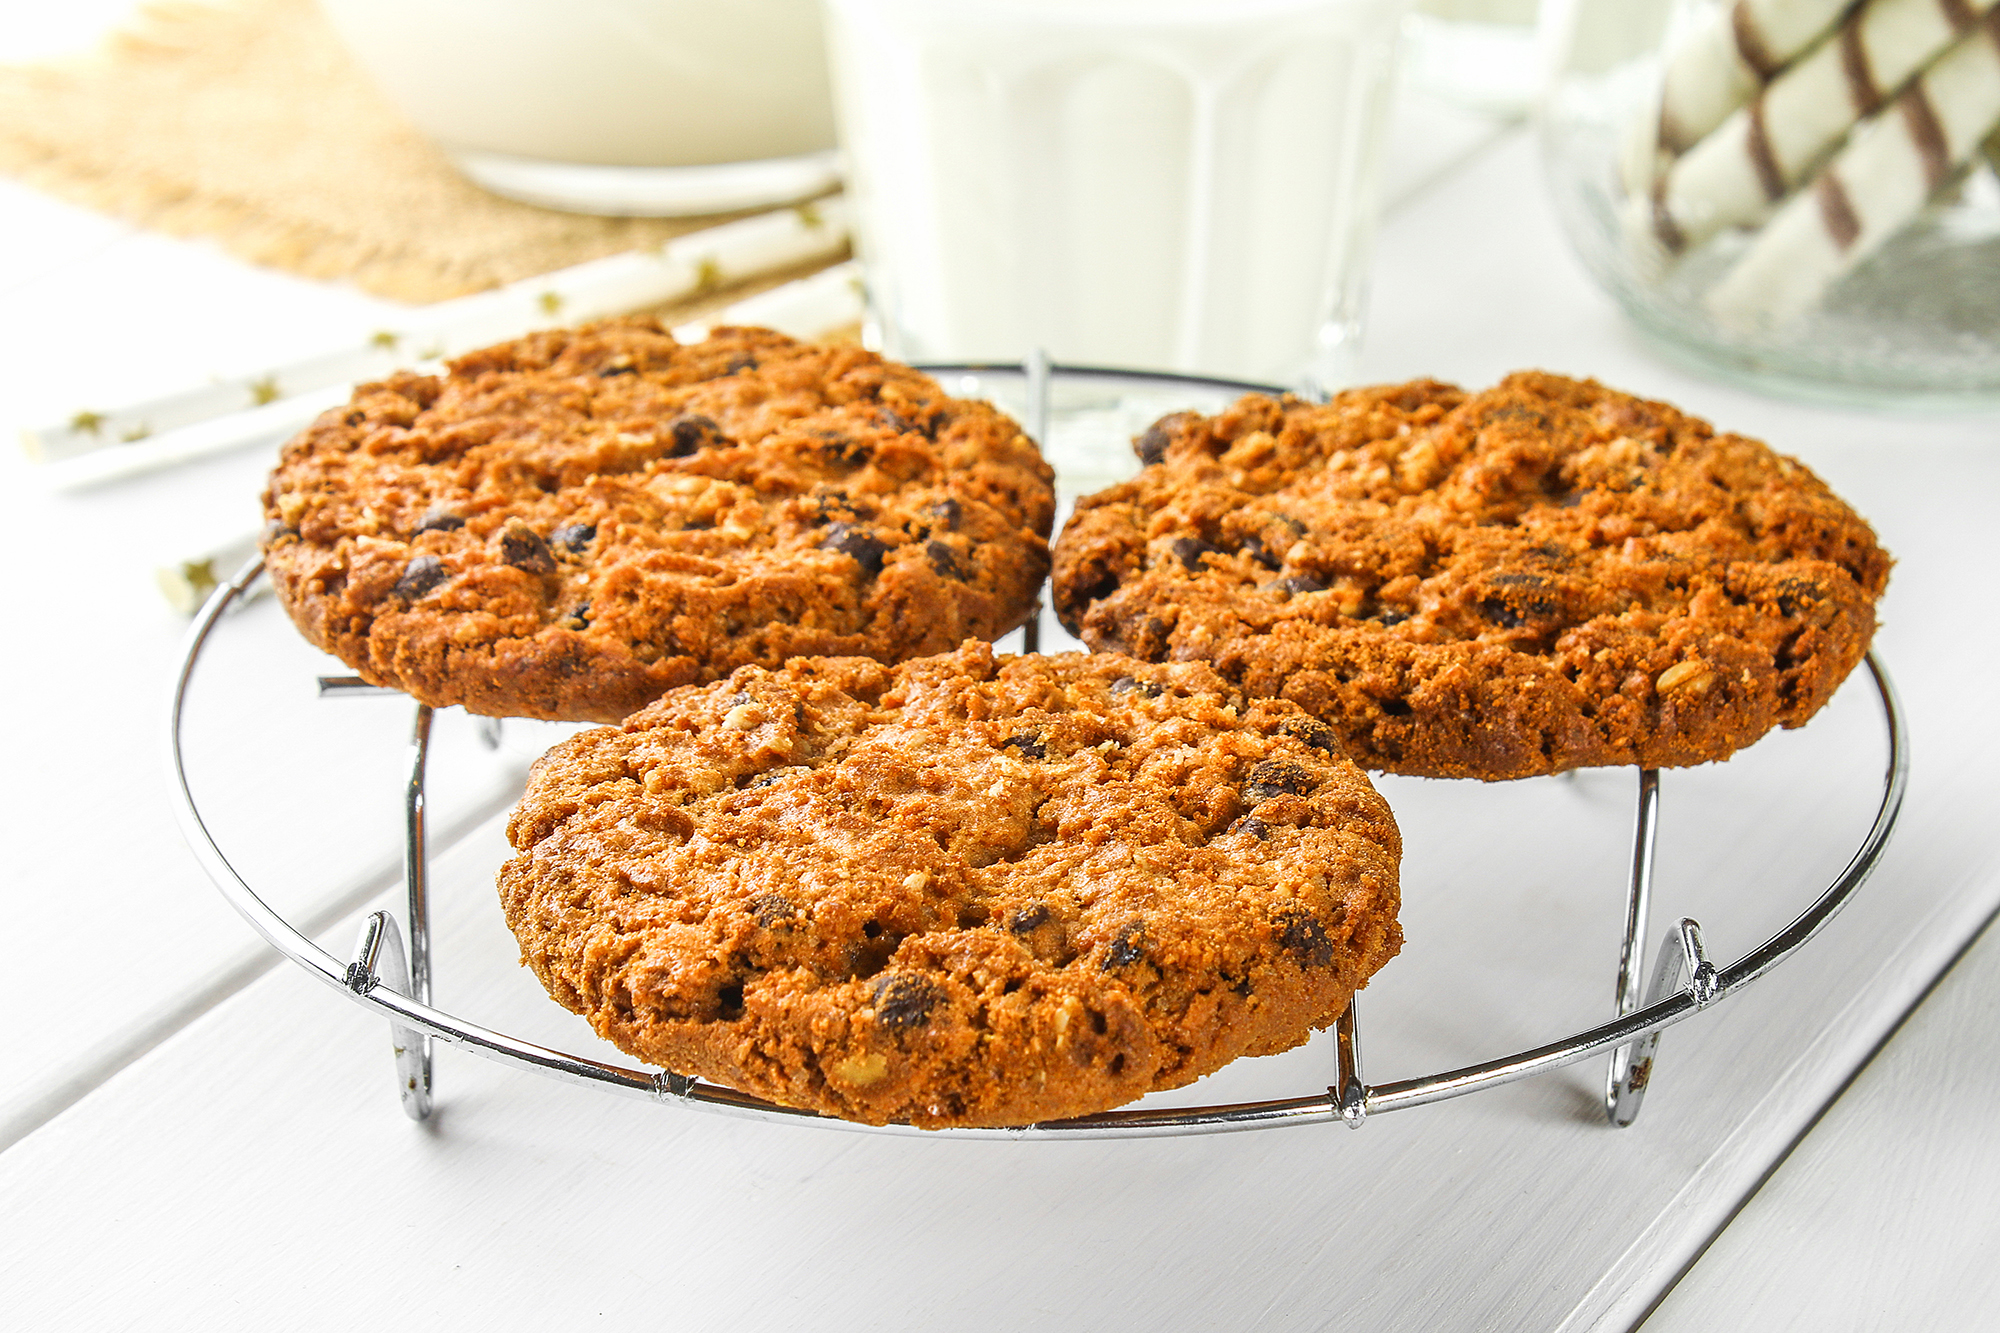 Homemade oatmeal cookies. Cookies on an iron grate on a wooden white table